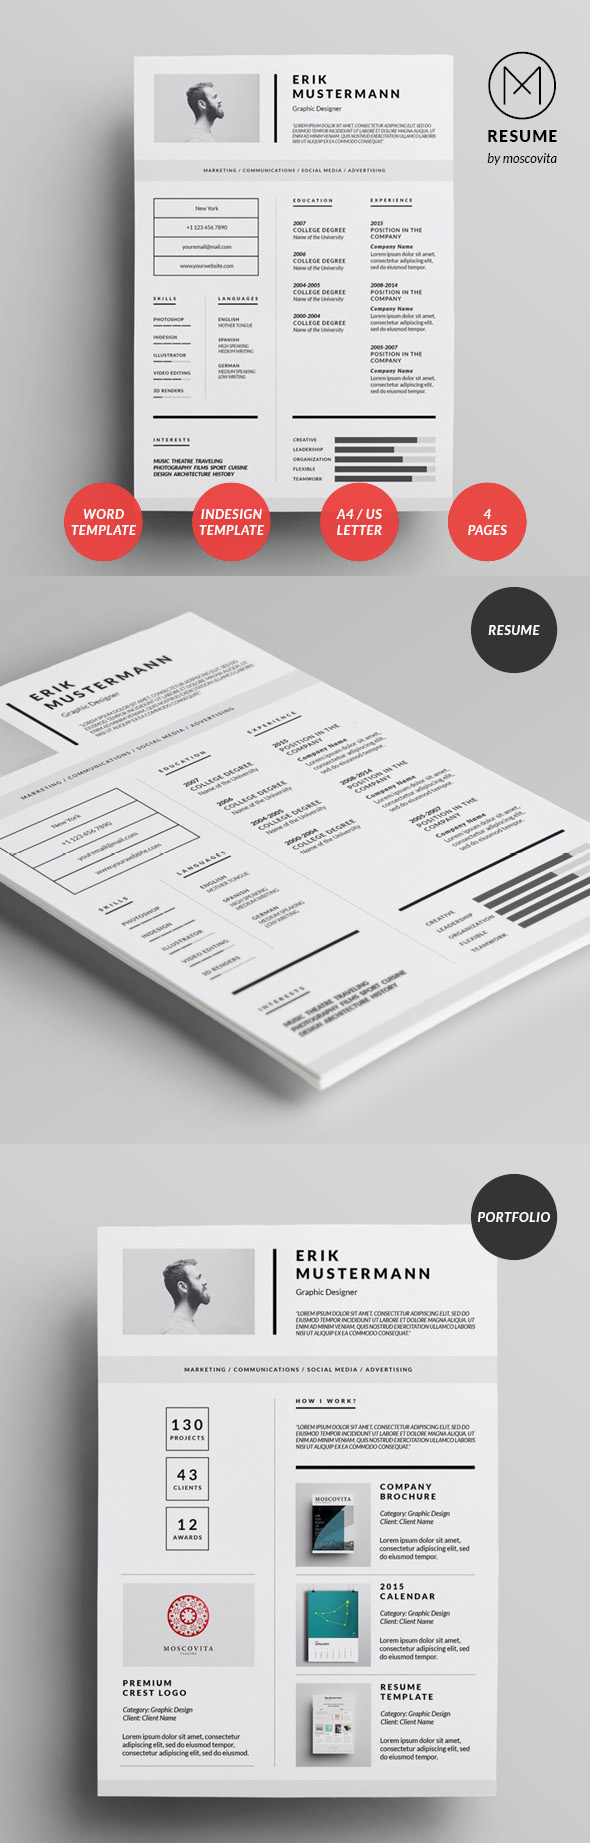 50 Best Resume Templates For 2018 - 32